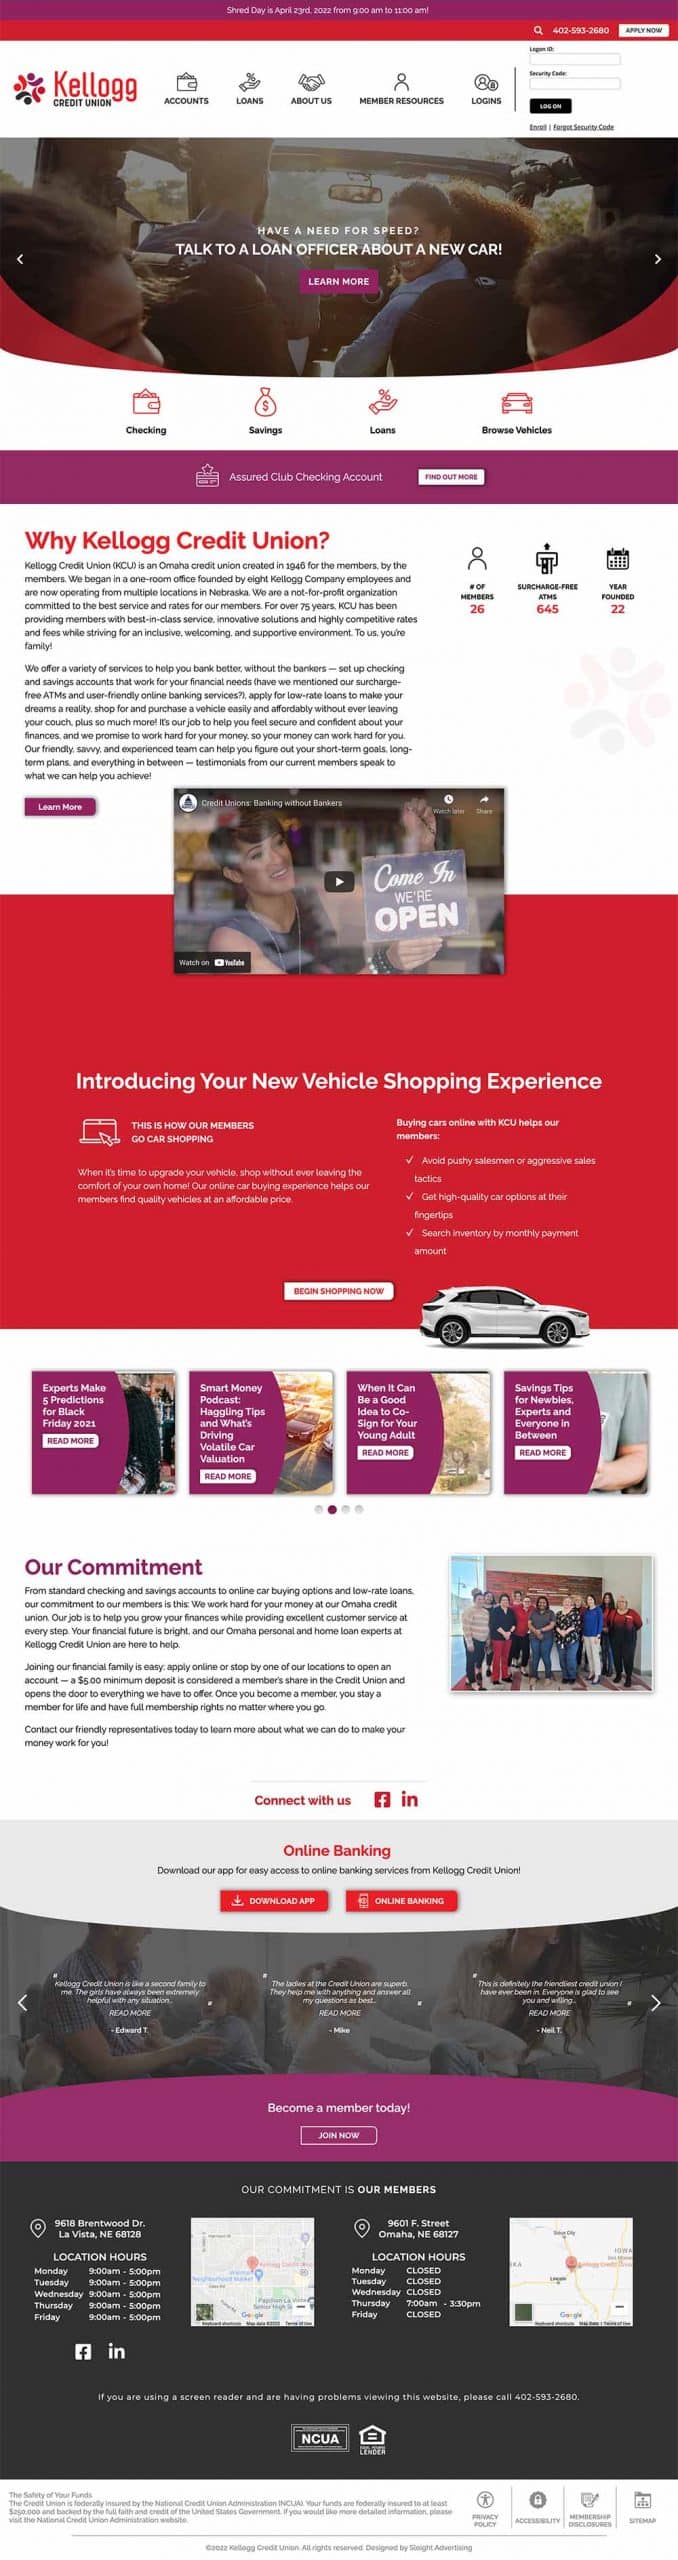 Kellogg Credit Union Mobile-First Website